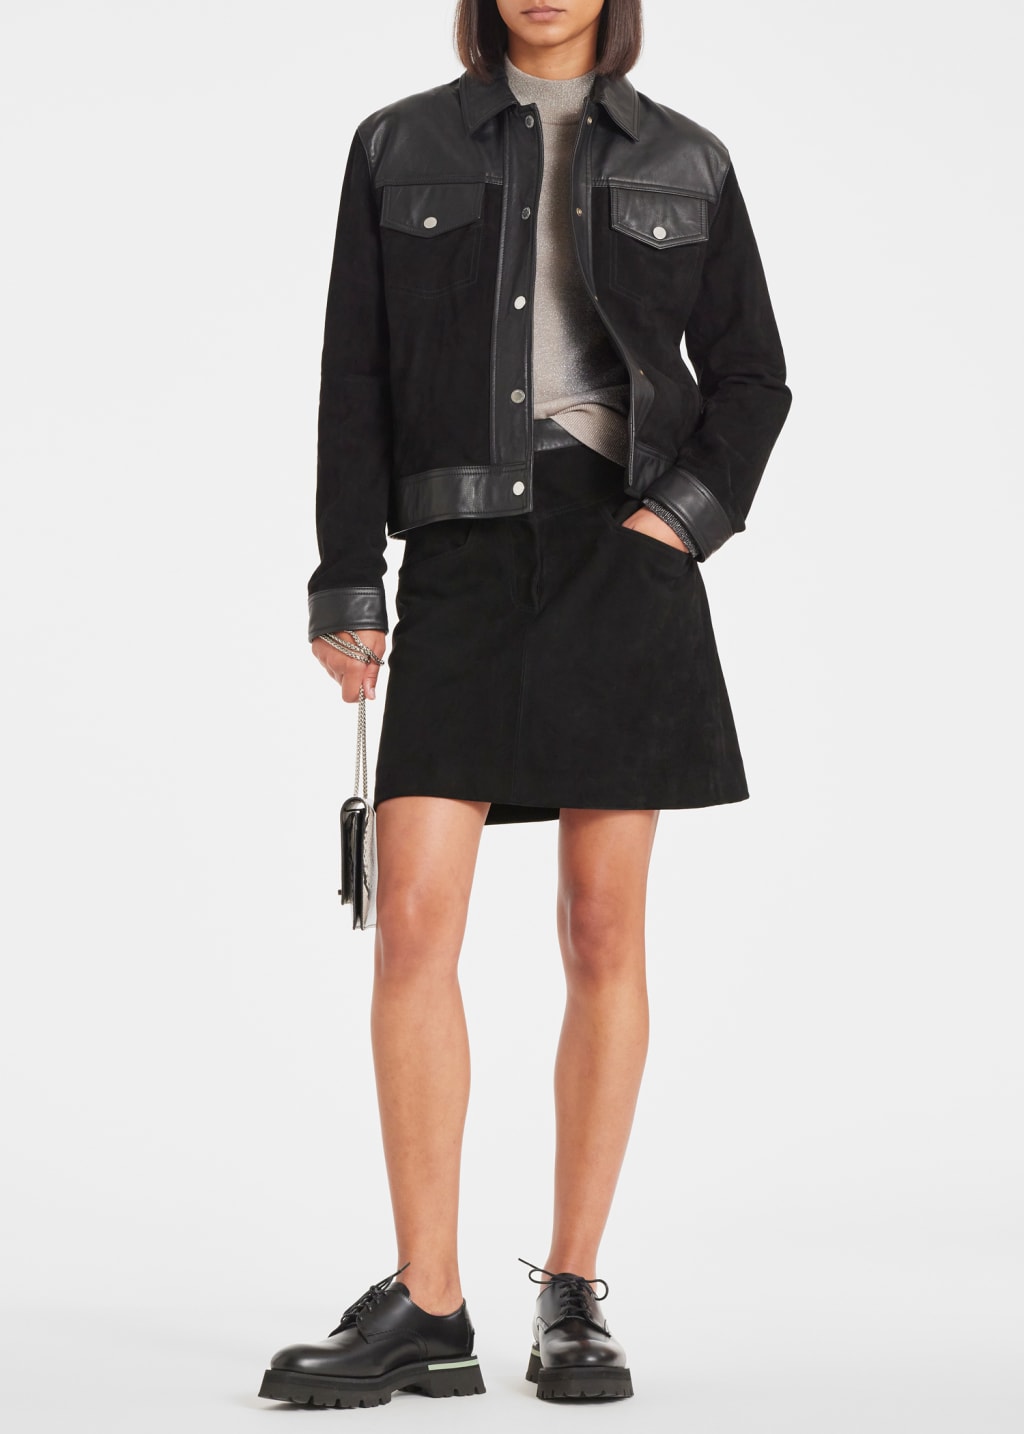 Model View - Women's Black Suede Contrasting Short Skirt Paul Smith